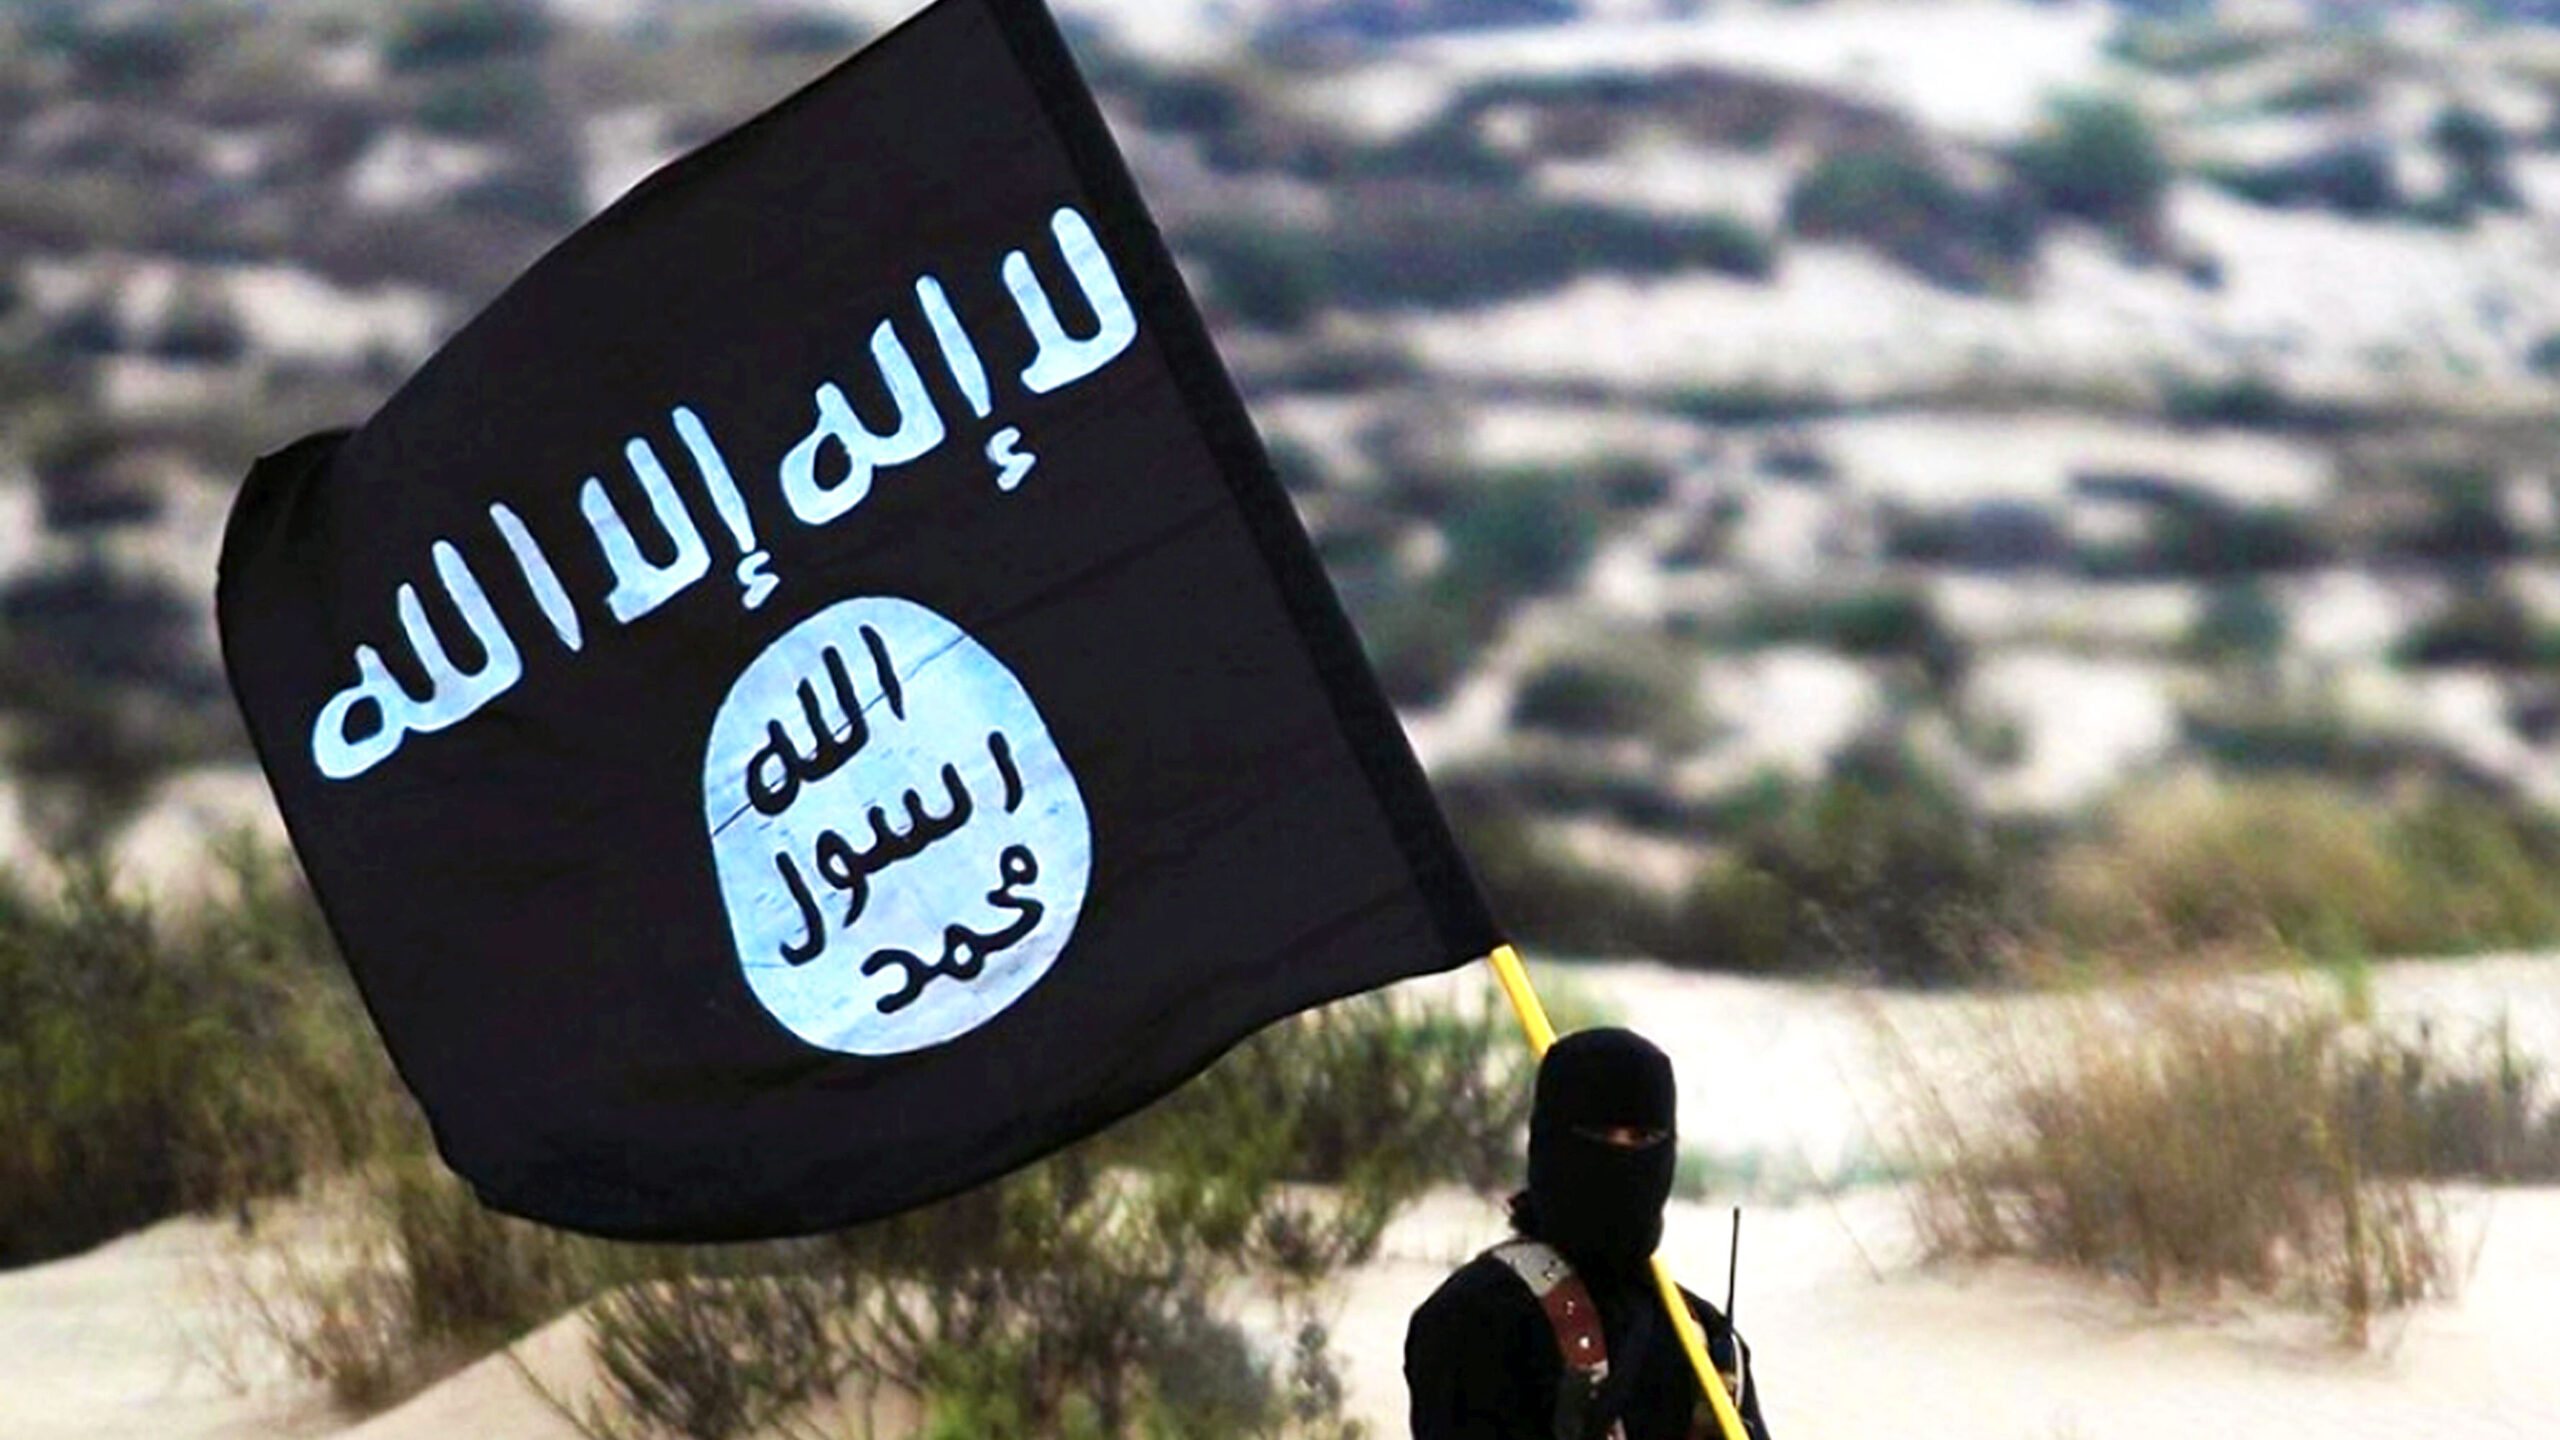 Report: Suspected ISIS Member Released by Biden Admin, Illegally Resided in U.S. for 2 Years